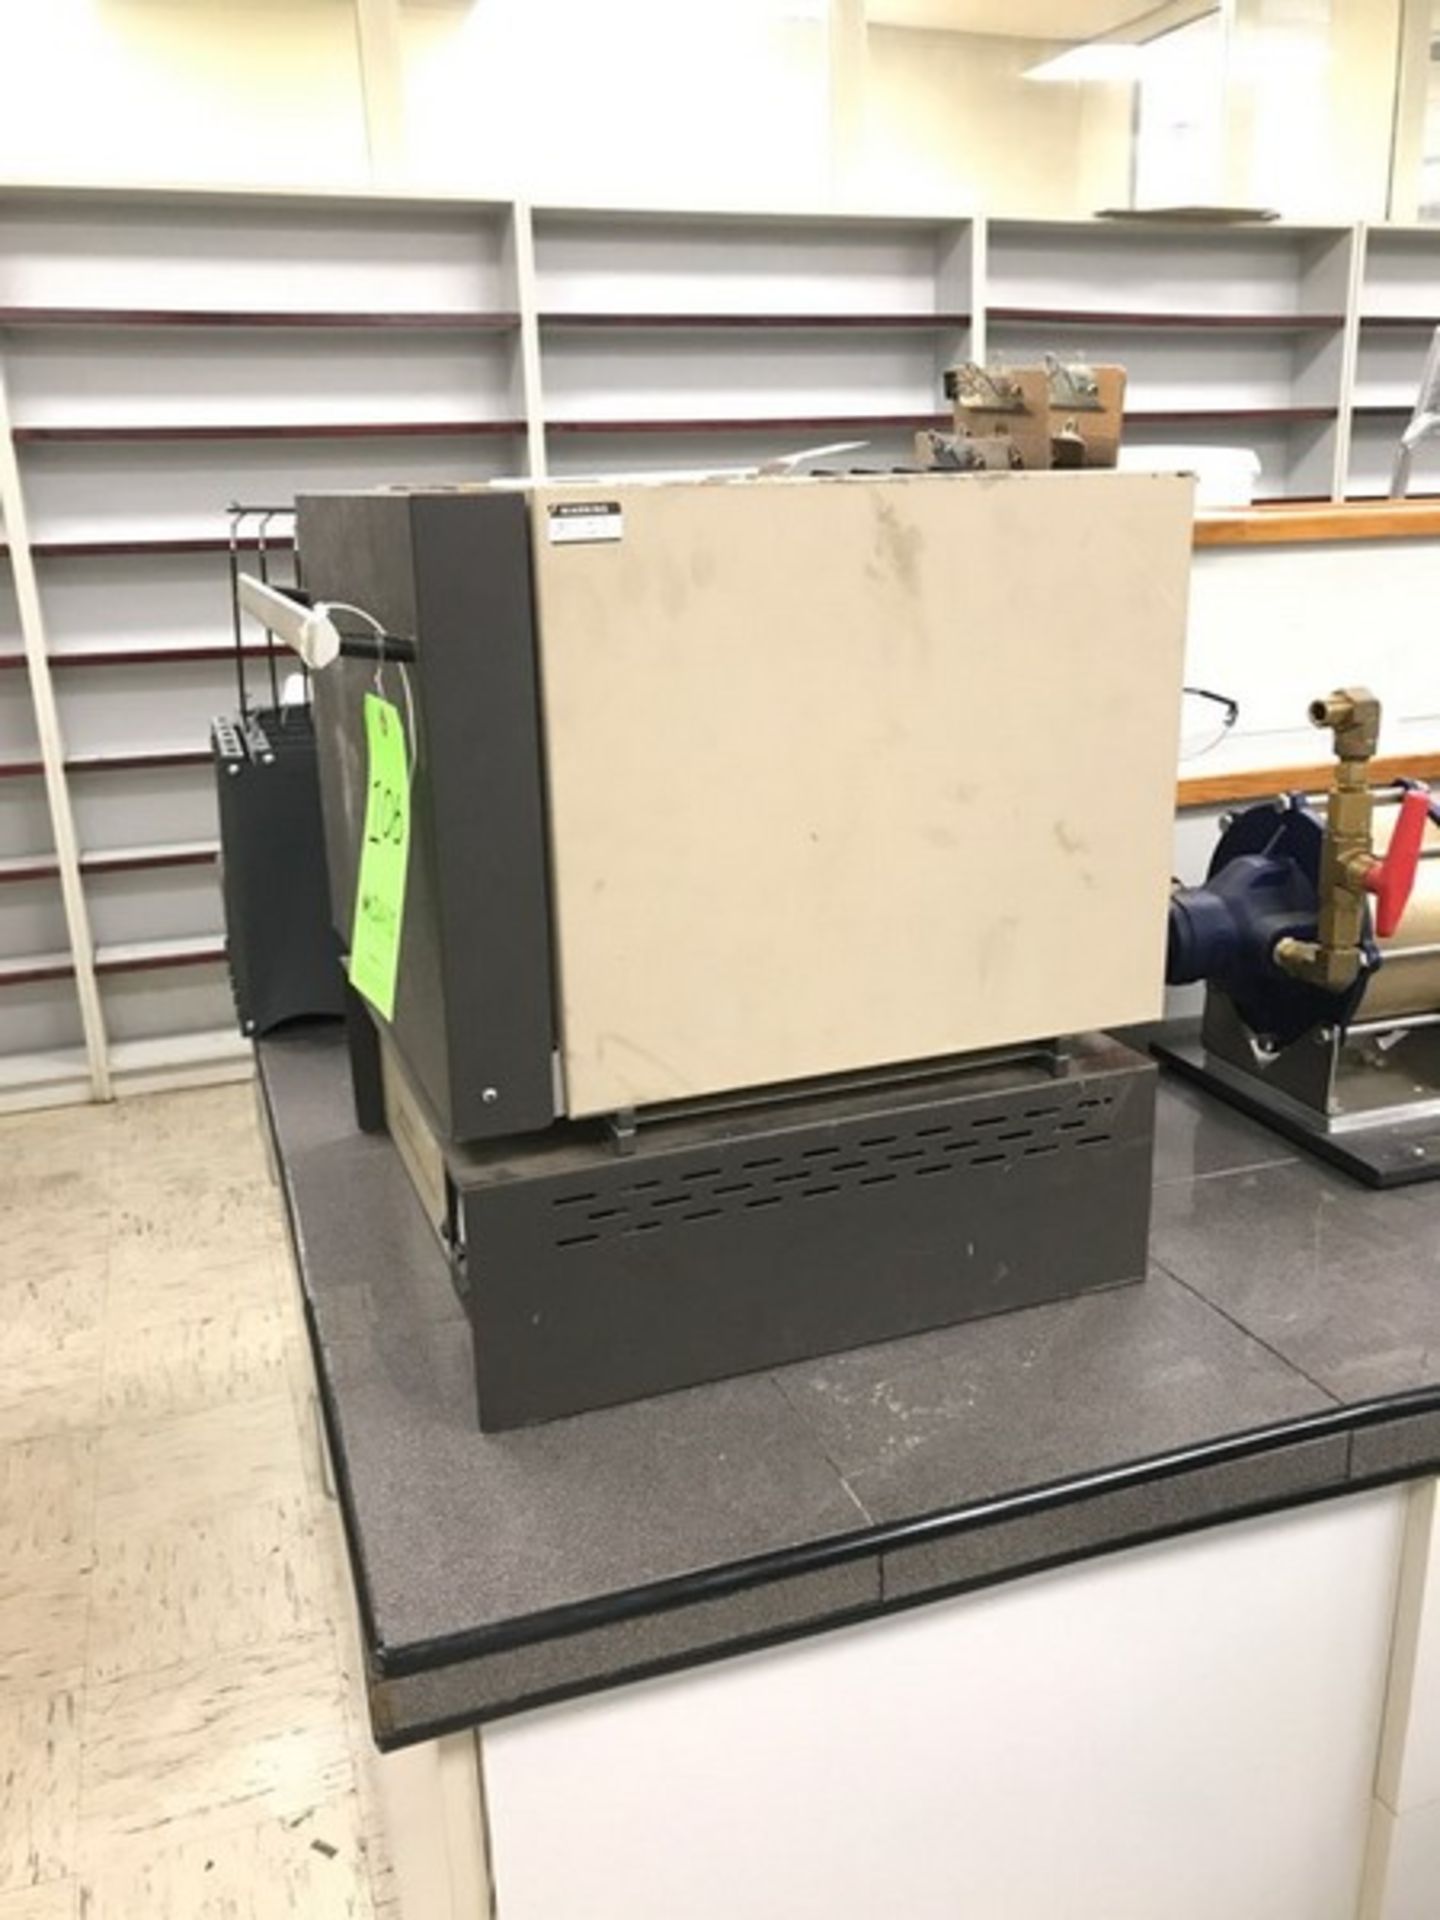 Thermolyne Programmable Furnace, Type 6000, M/N F6038C, S/N 40800214, 208 Volts, 1 Phase, 50/60 - Image 3 of 5